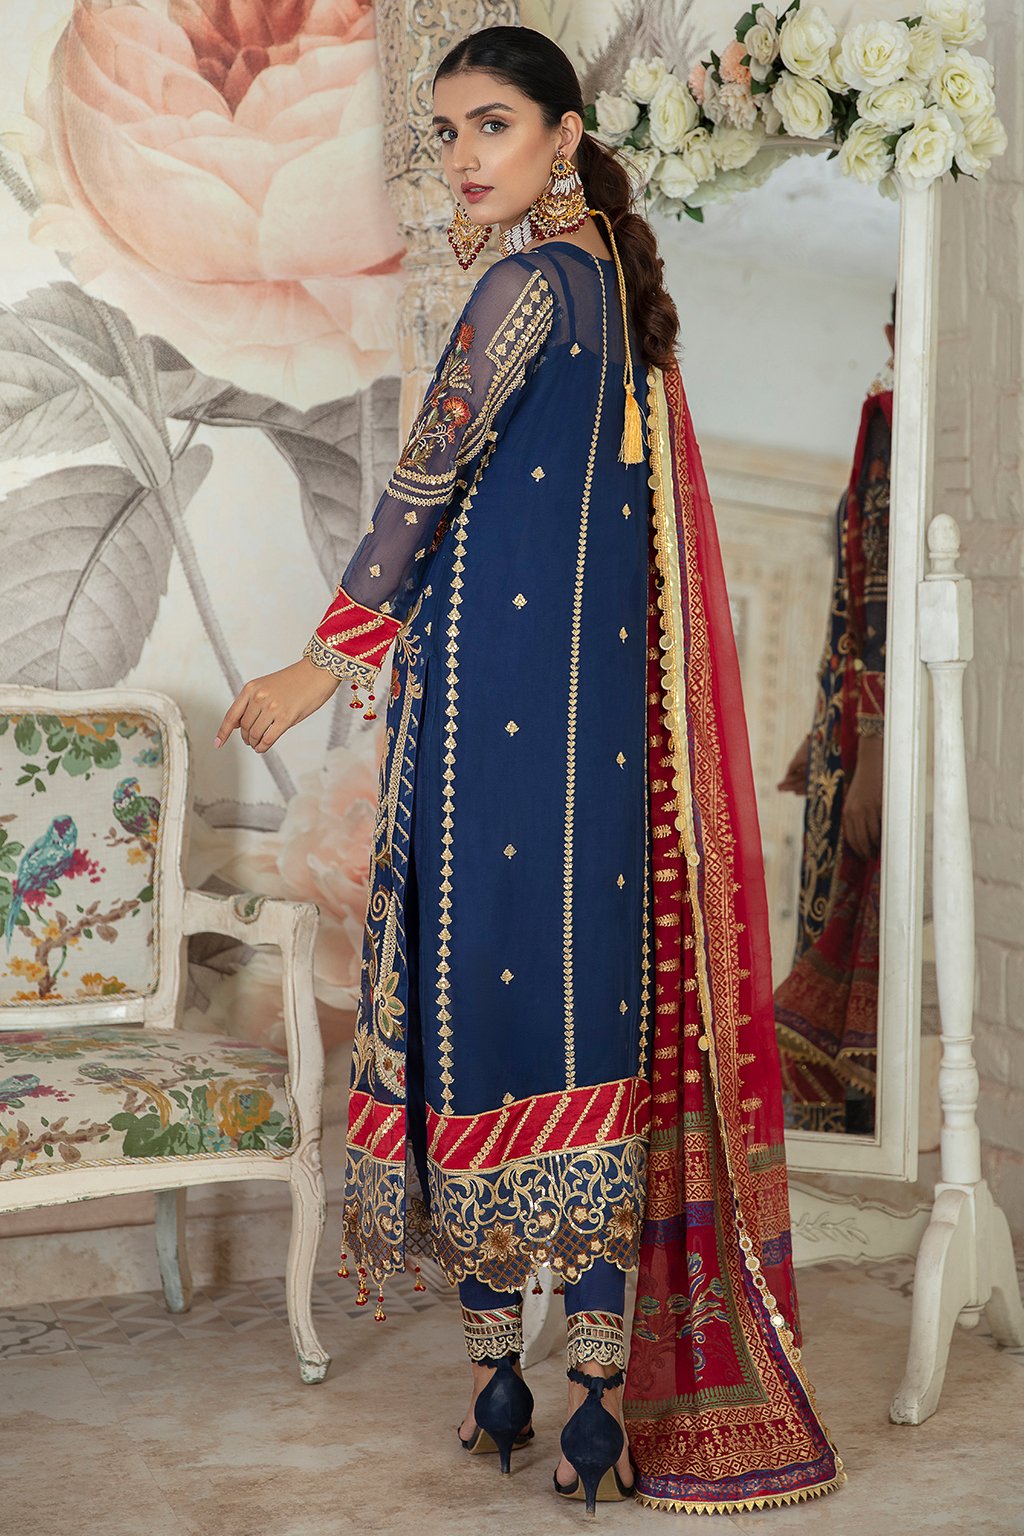 Emaan Adeel Embroidered Chiffon Dress Unstitched 3piece - LE 04